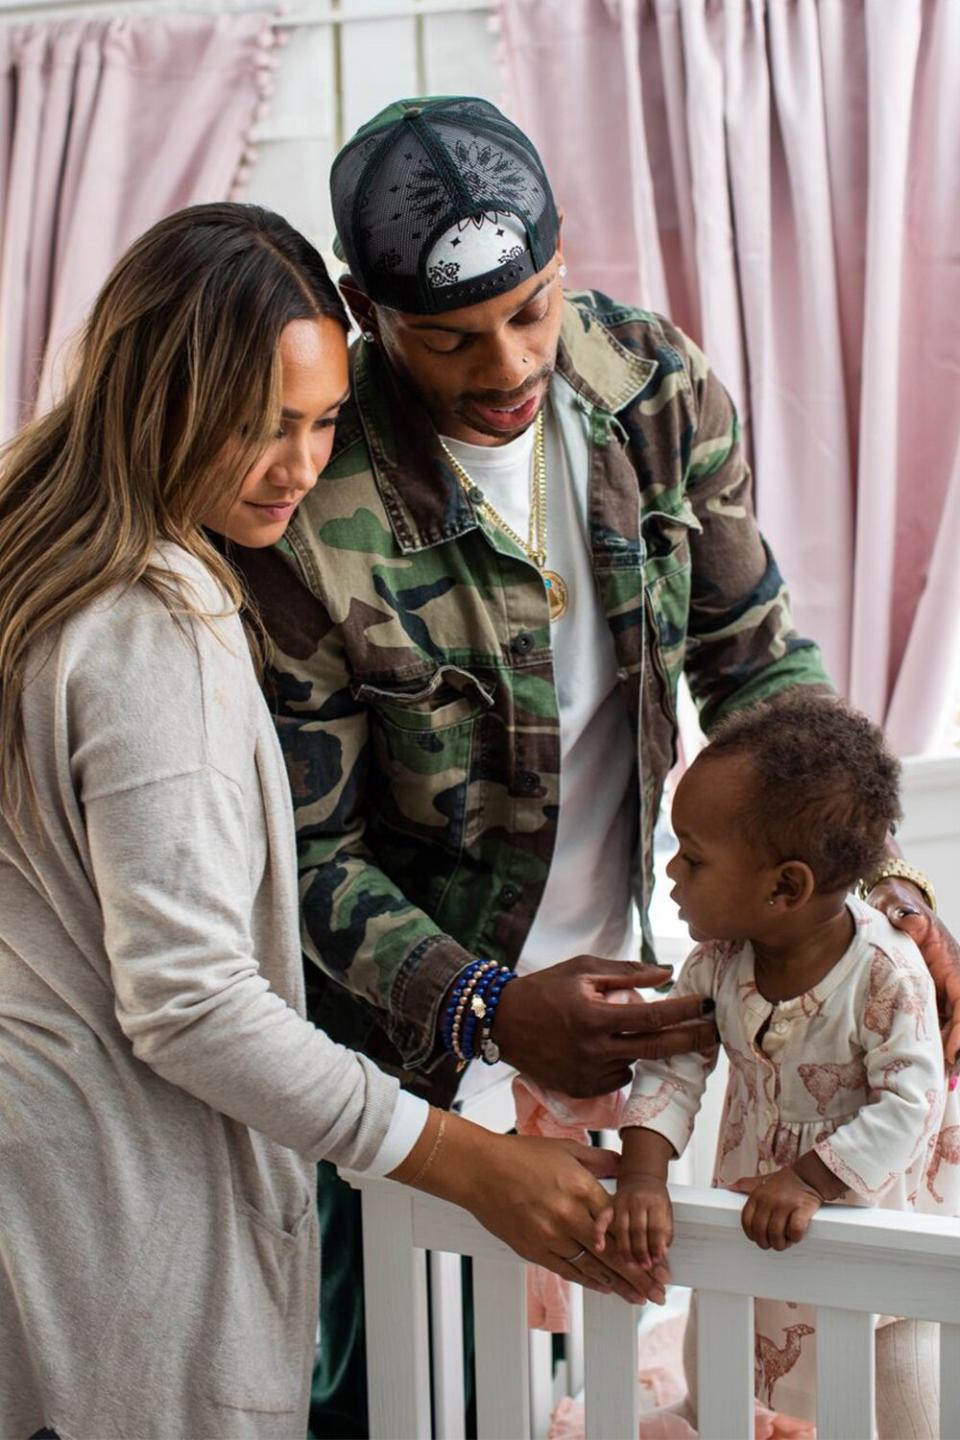  Jimmie Allen and wife Alexis, daughter Zara Where was the image taken – Nashville, TN When was the image taken – September 2022 Who took the photograph – Family photographer; does not request credit Full credit line – Courtesy of the Allen family